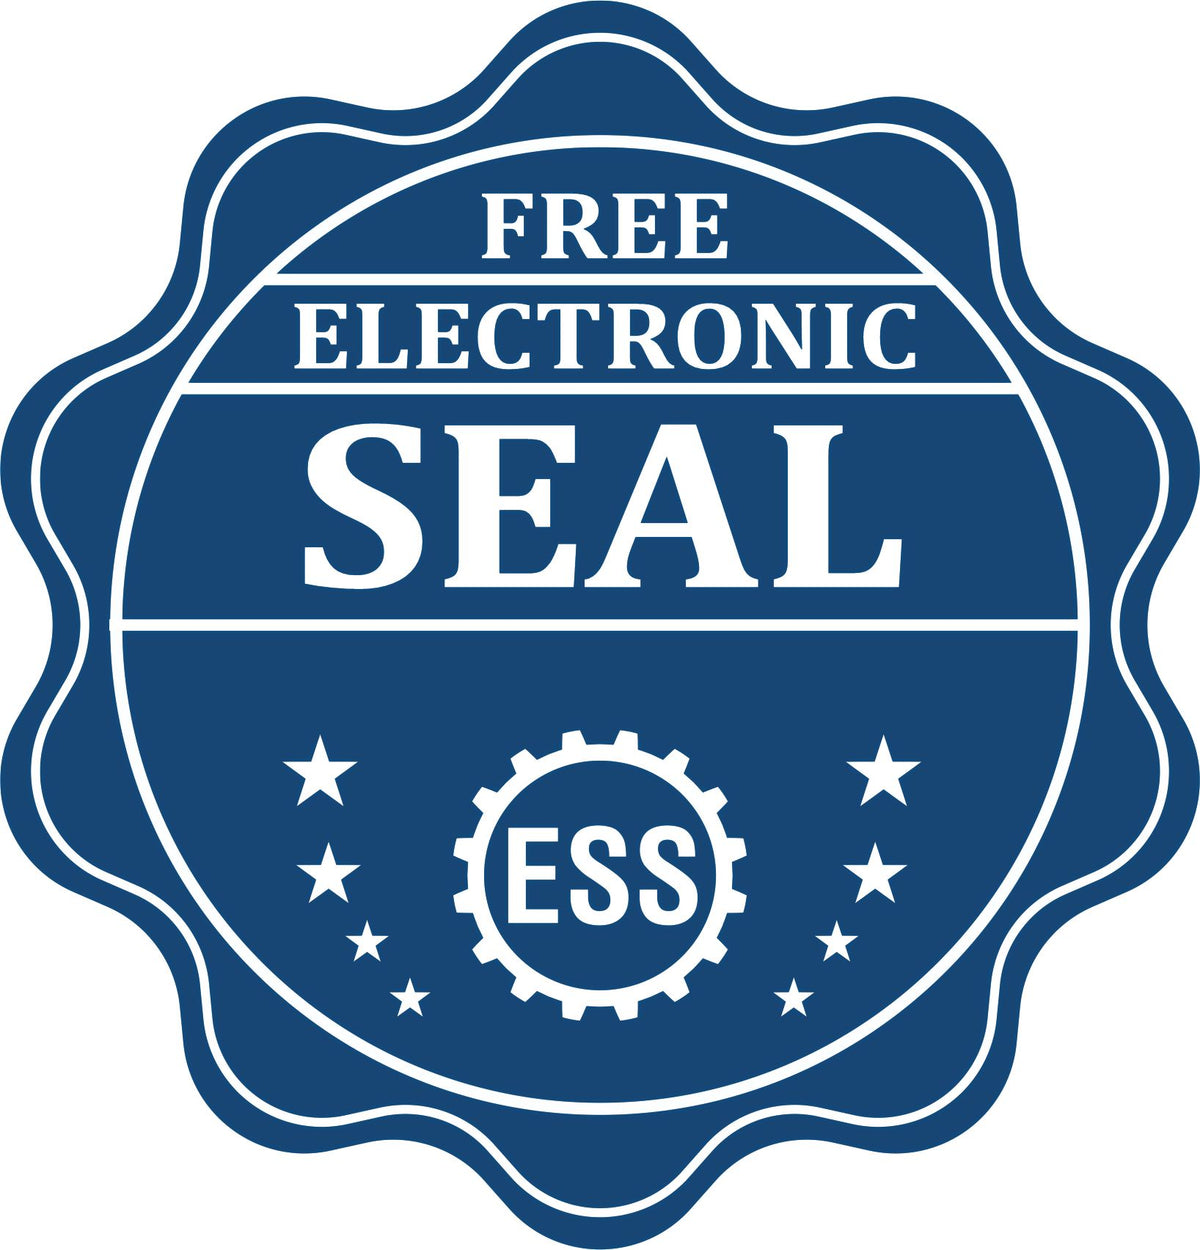 A badge showing a free electronic seal for the Slim Pre-Inked State Seal Notary Stamp for Iowa with stars and the ESS gear on the emblem.